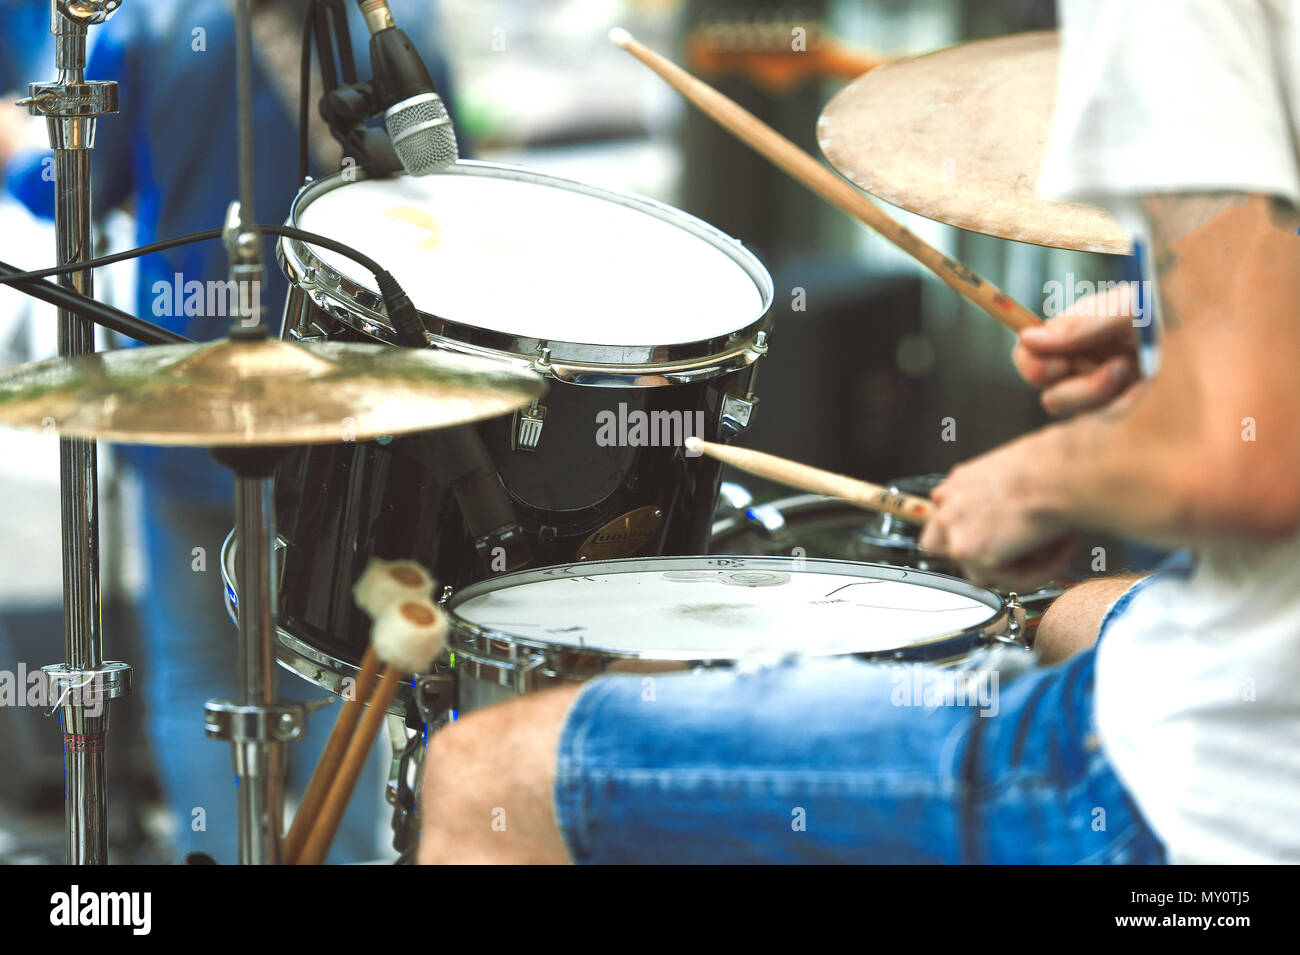 Drummer detail of a pop group during a show. Stock Photo